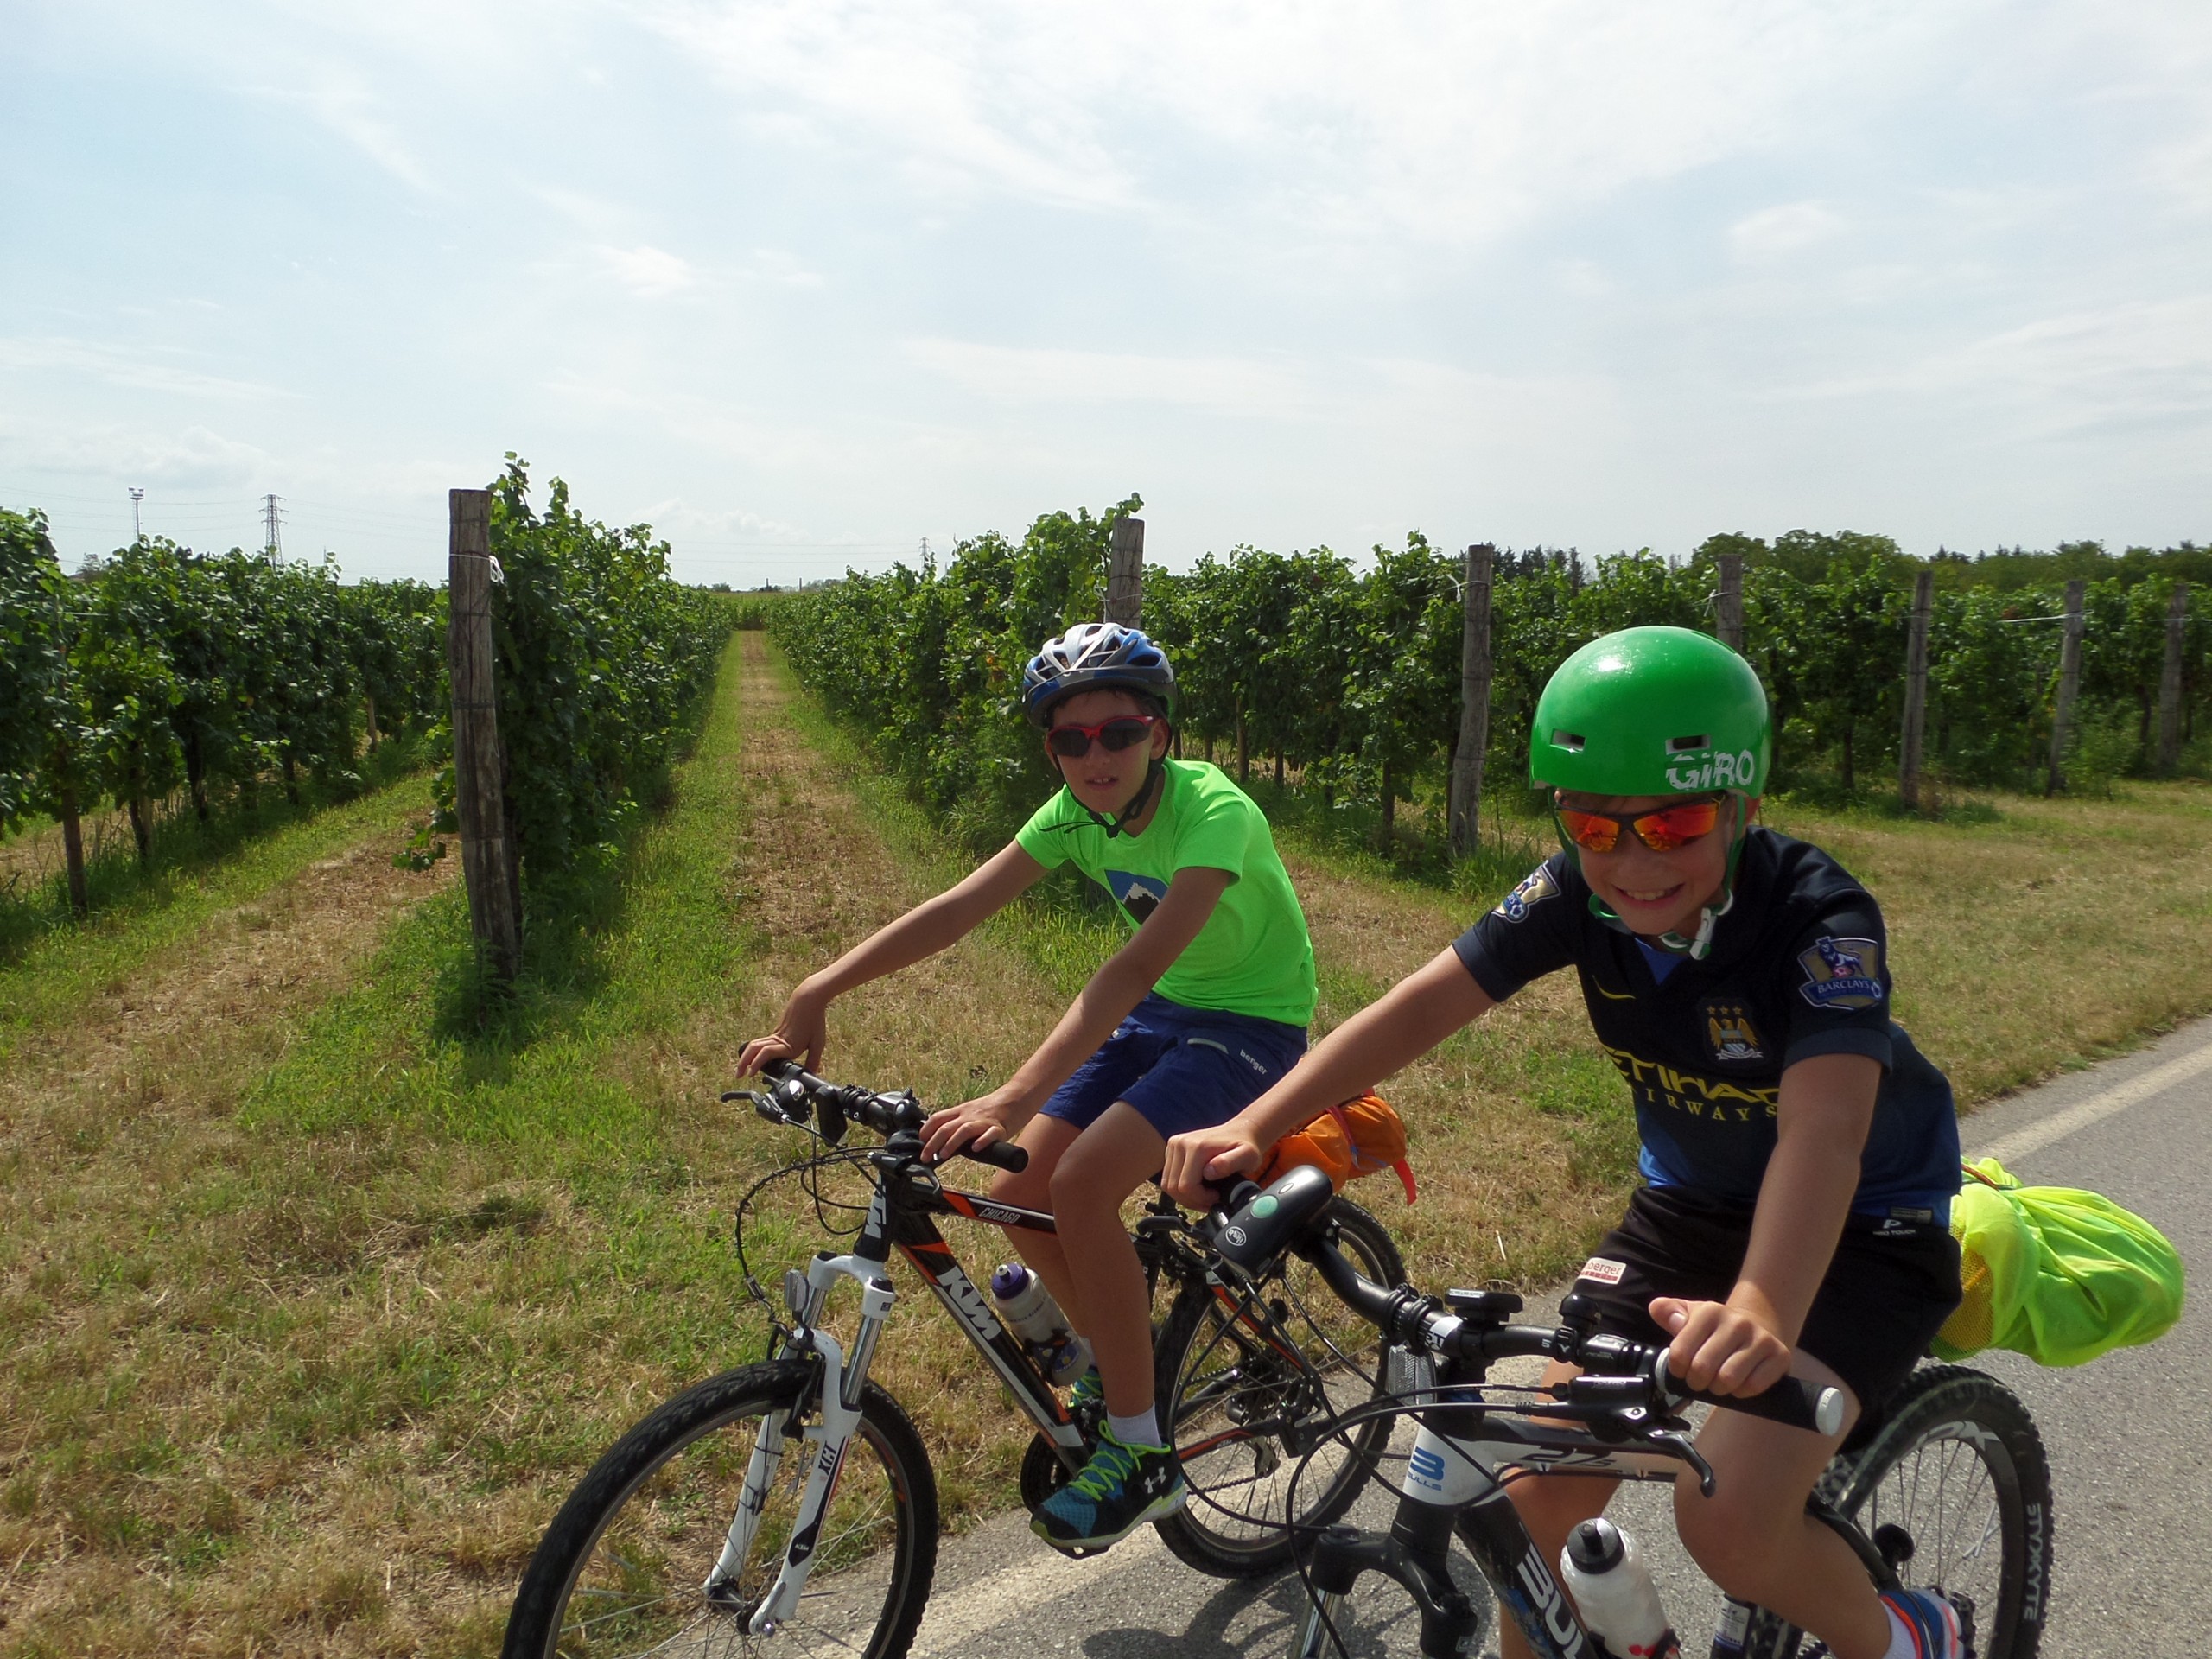 Couple biking in the vineyards of South Tyrol